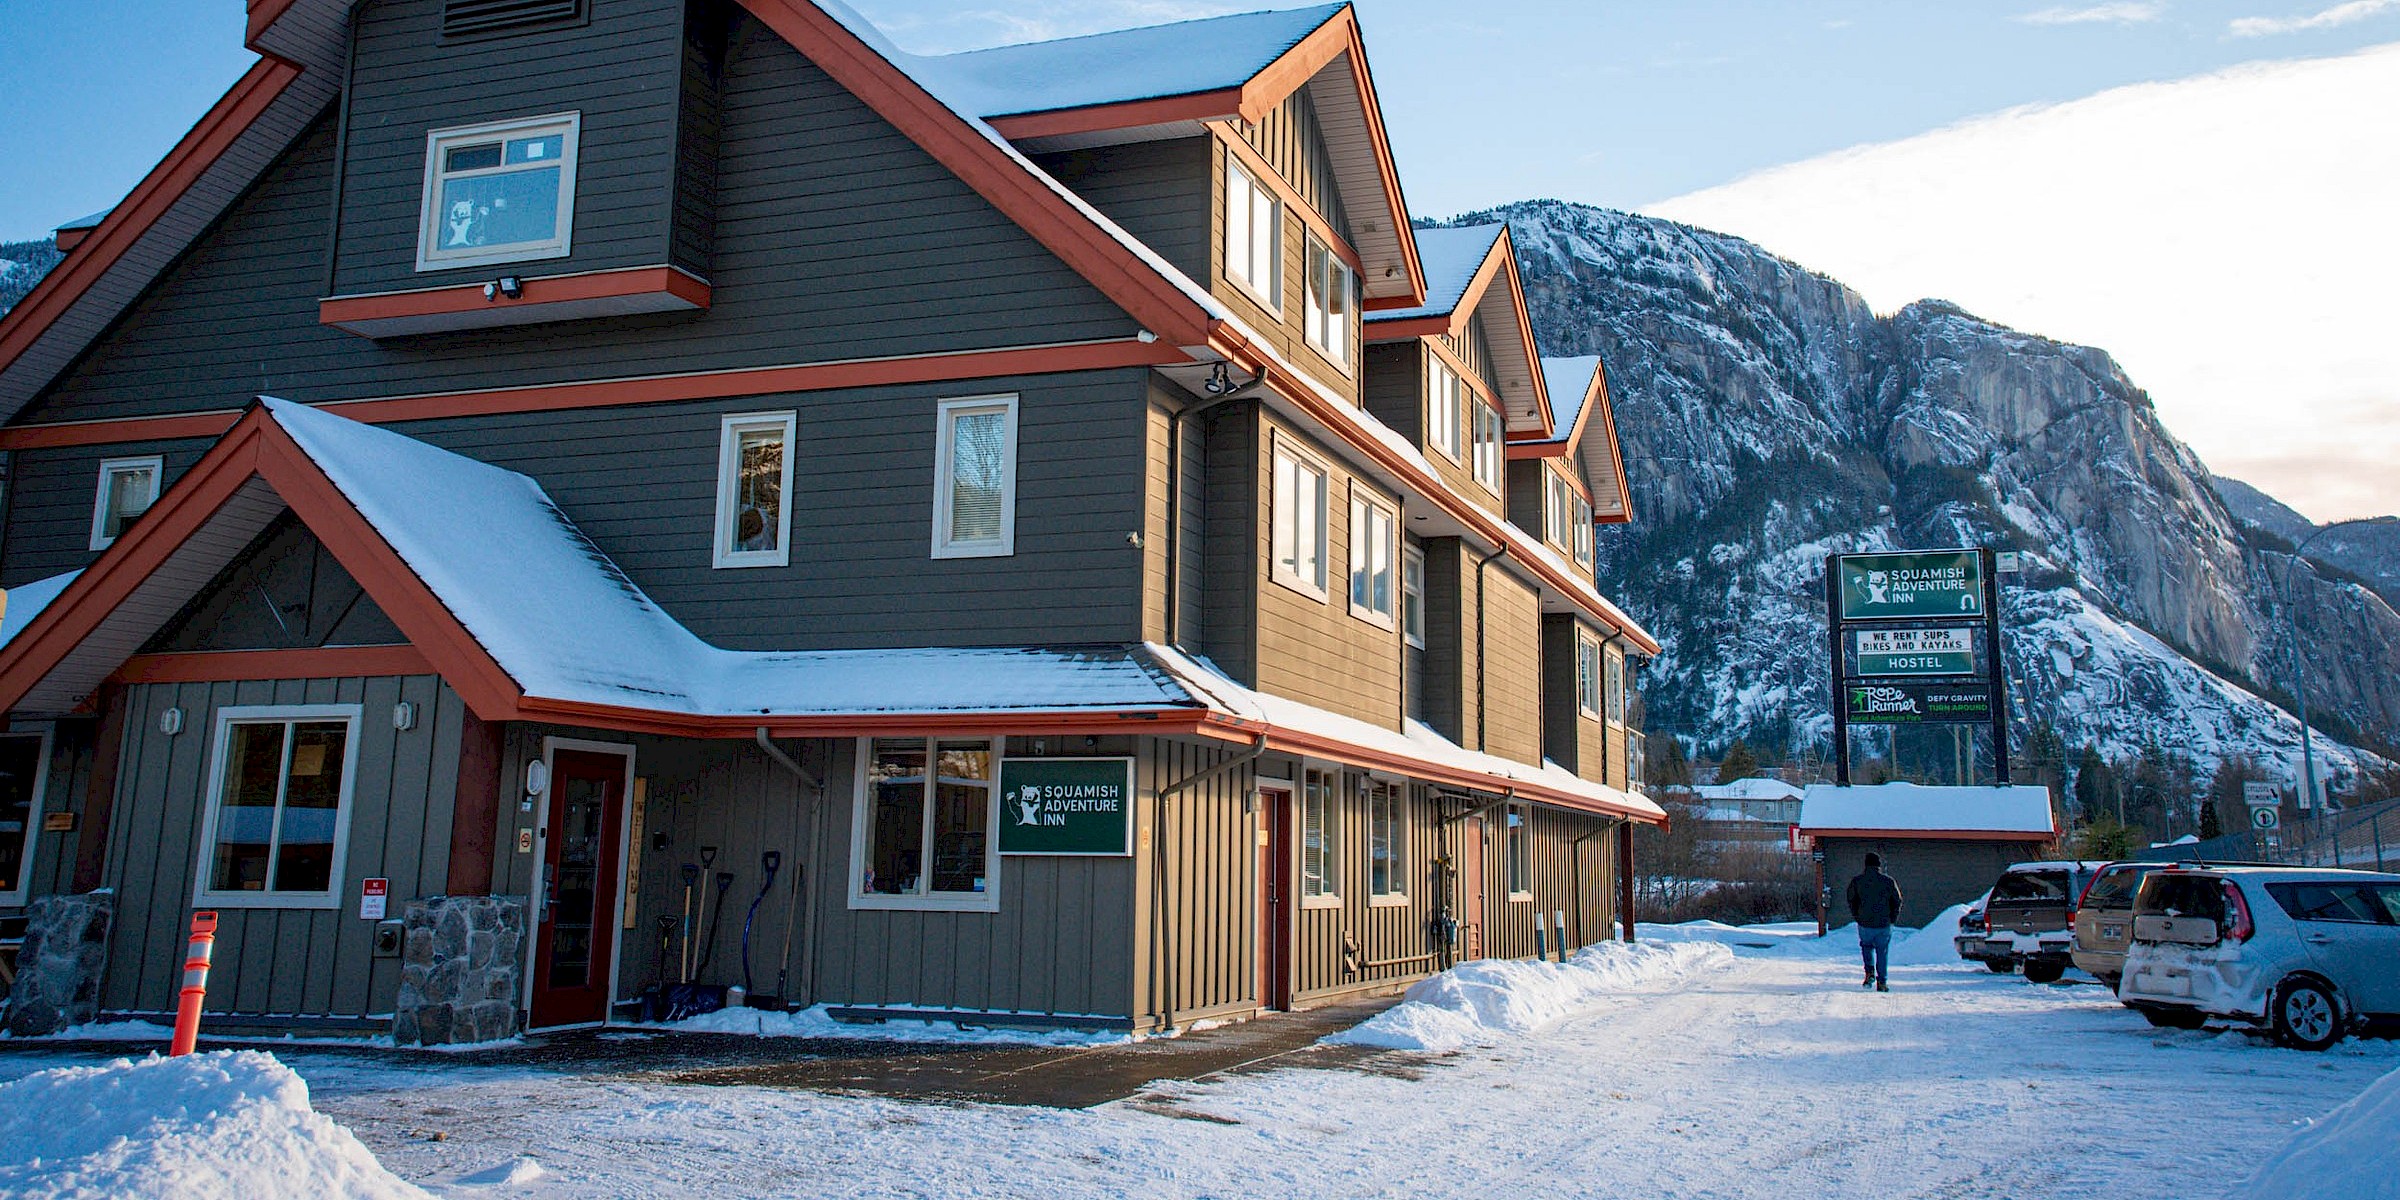 The Squamish Adventure Inn on a snowy day